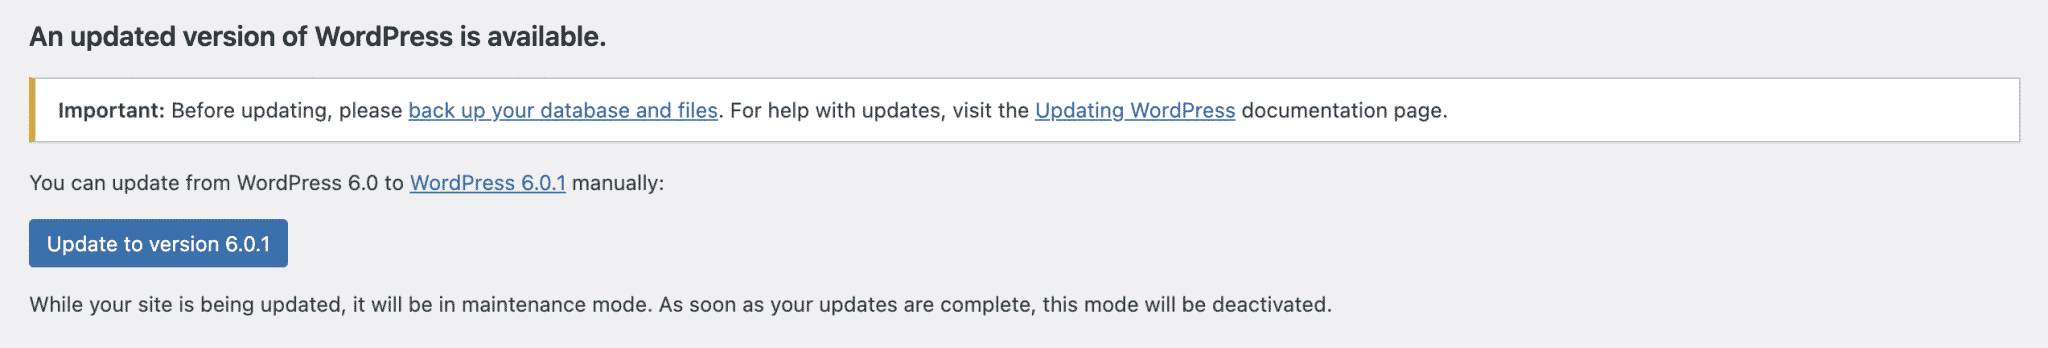 Updates to the WordPress Core available on the dashboard.